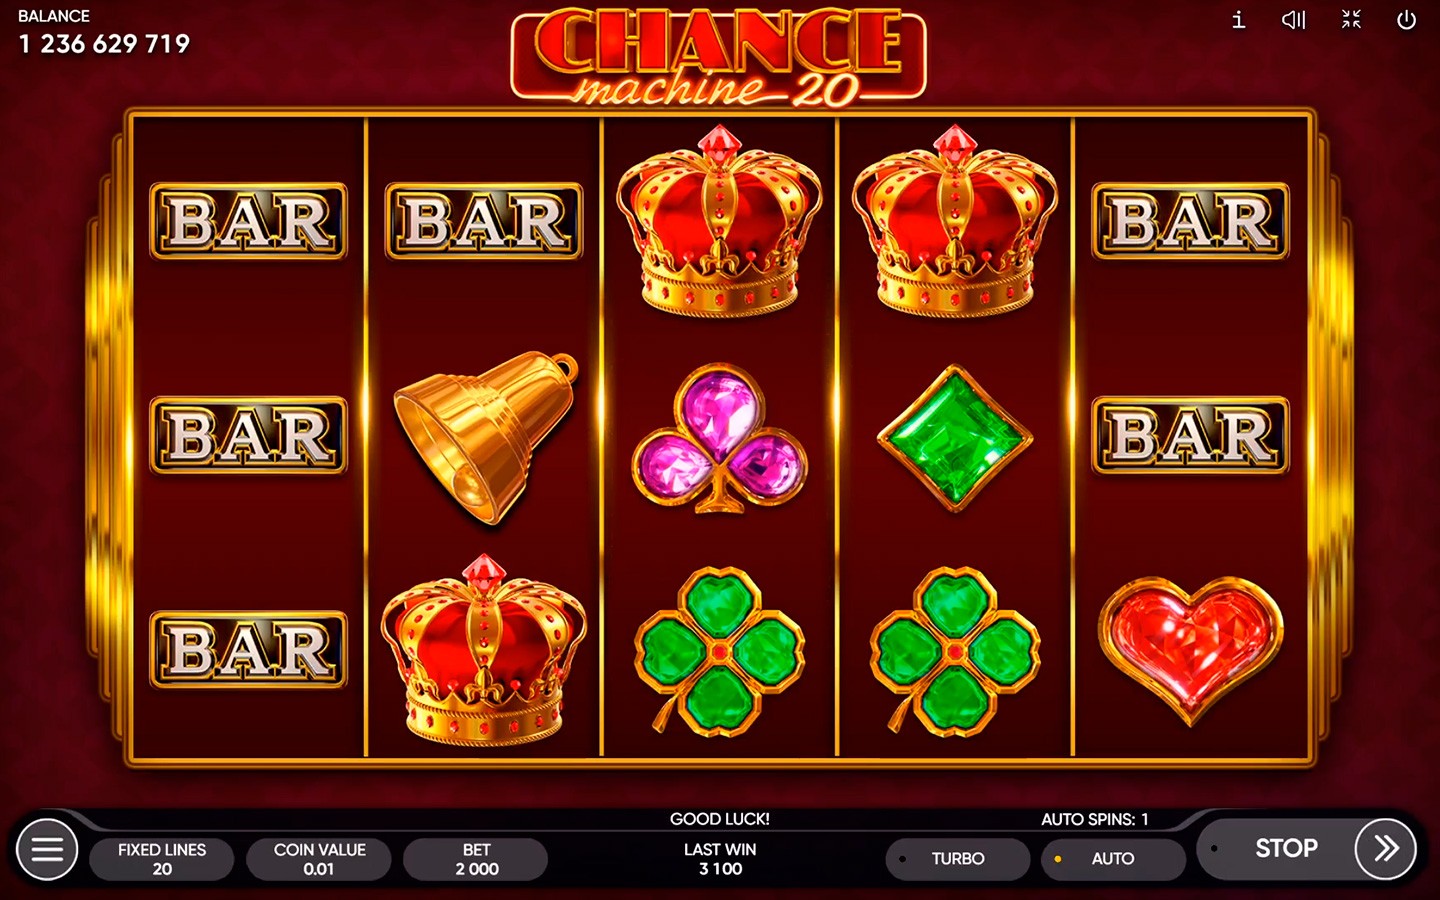 TOP CLASSIC SLOTS OF 2020 | Chance Machine 20 game by Endorphina